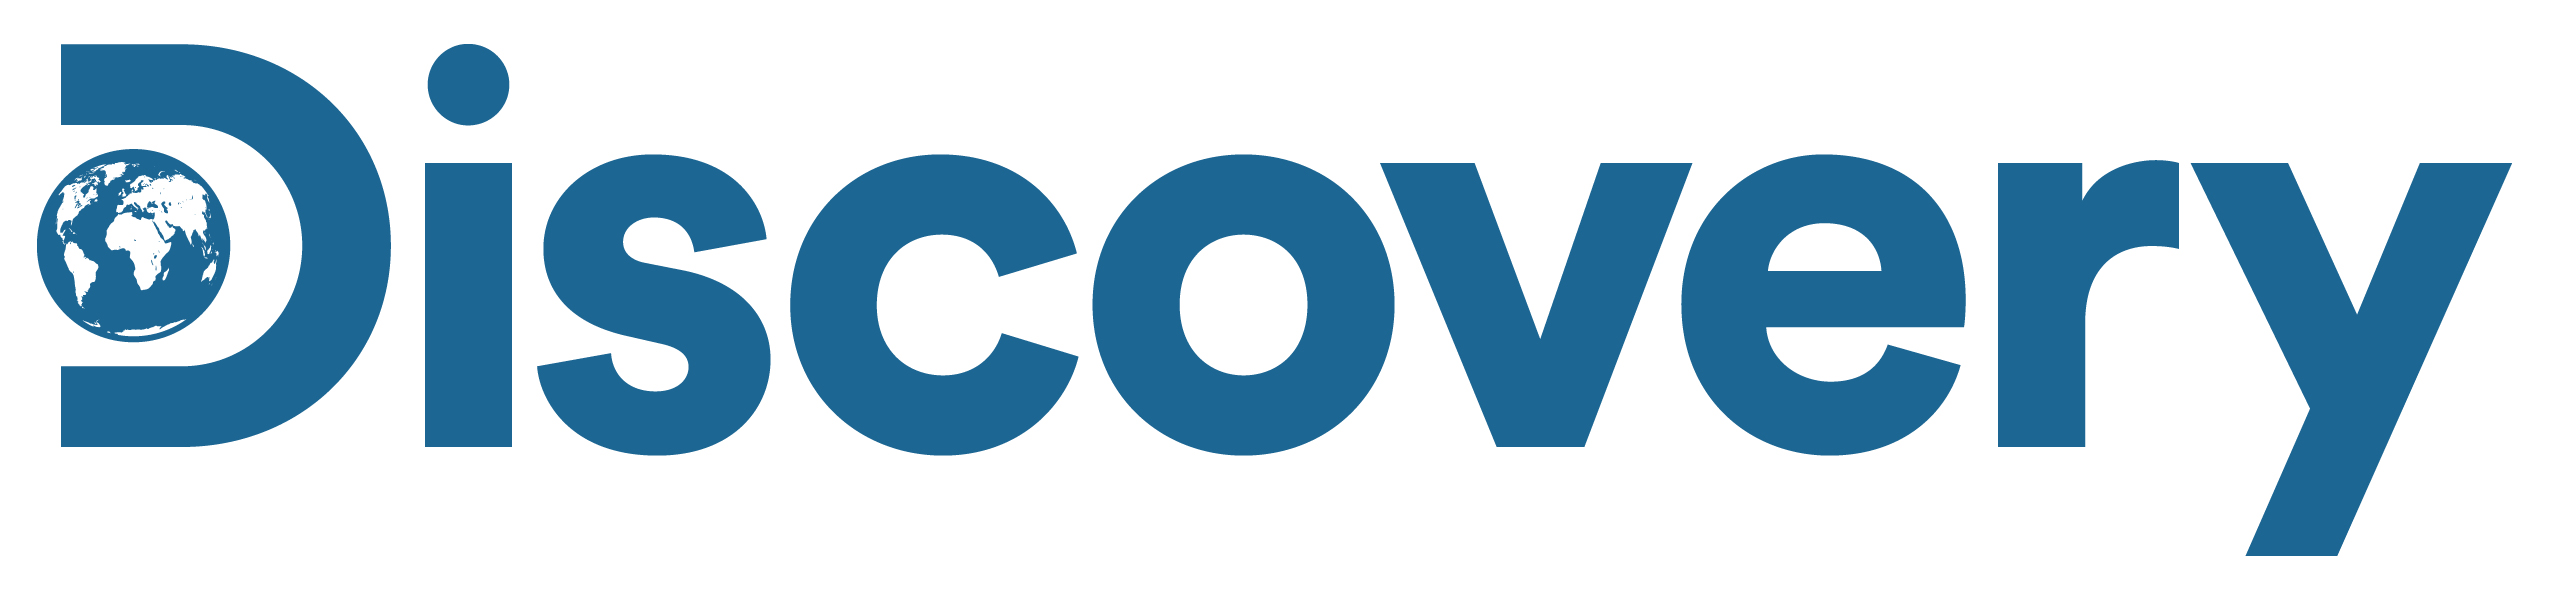 Channel logo for Discovery Channel HD